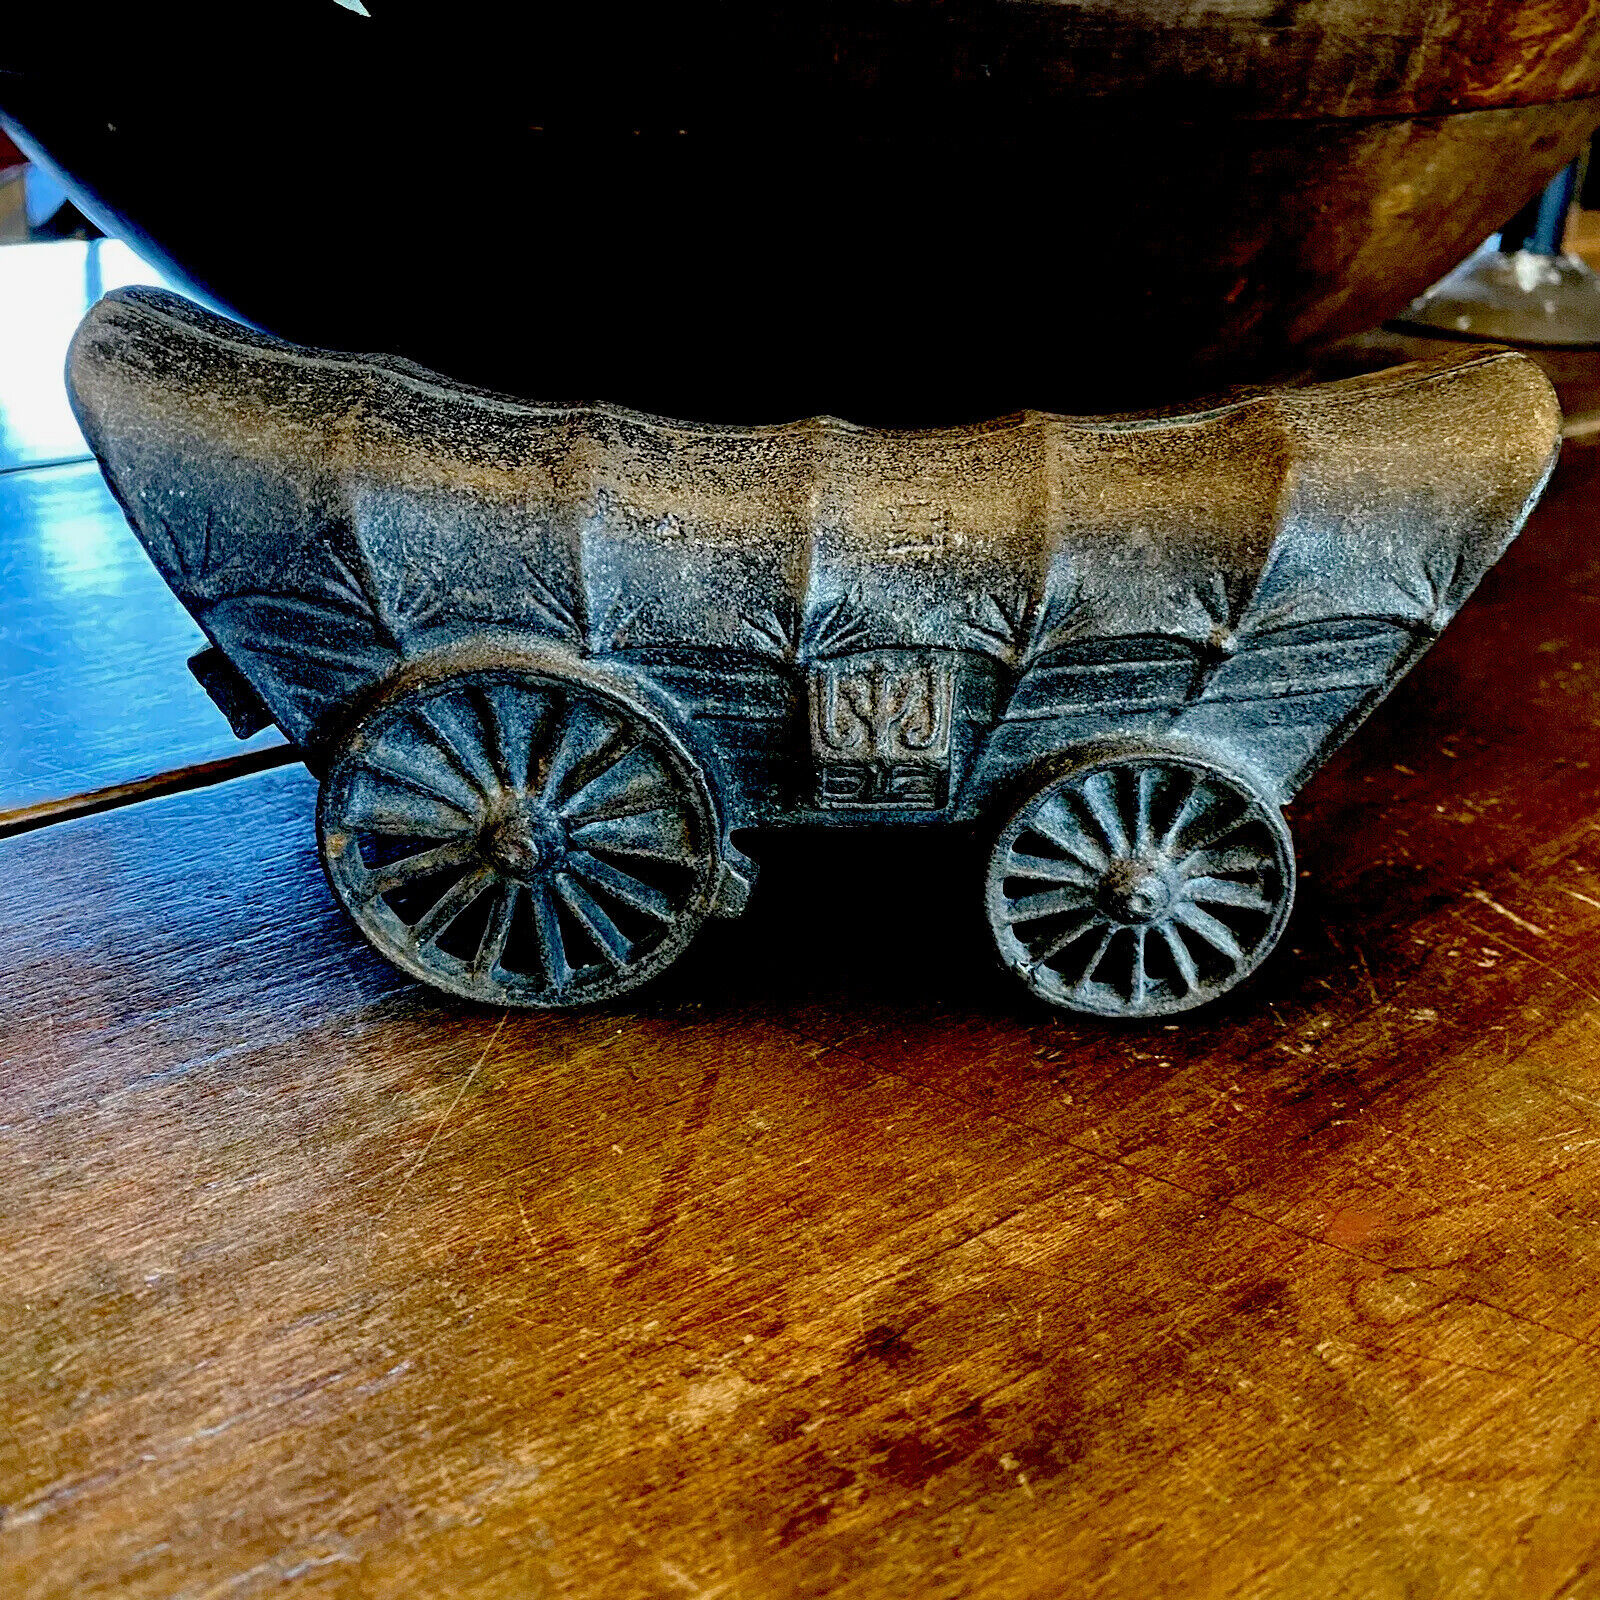 Vintage Antique CONESTOGA COVERED WAGON Cast Iron Toy Coin Bank